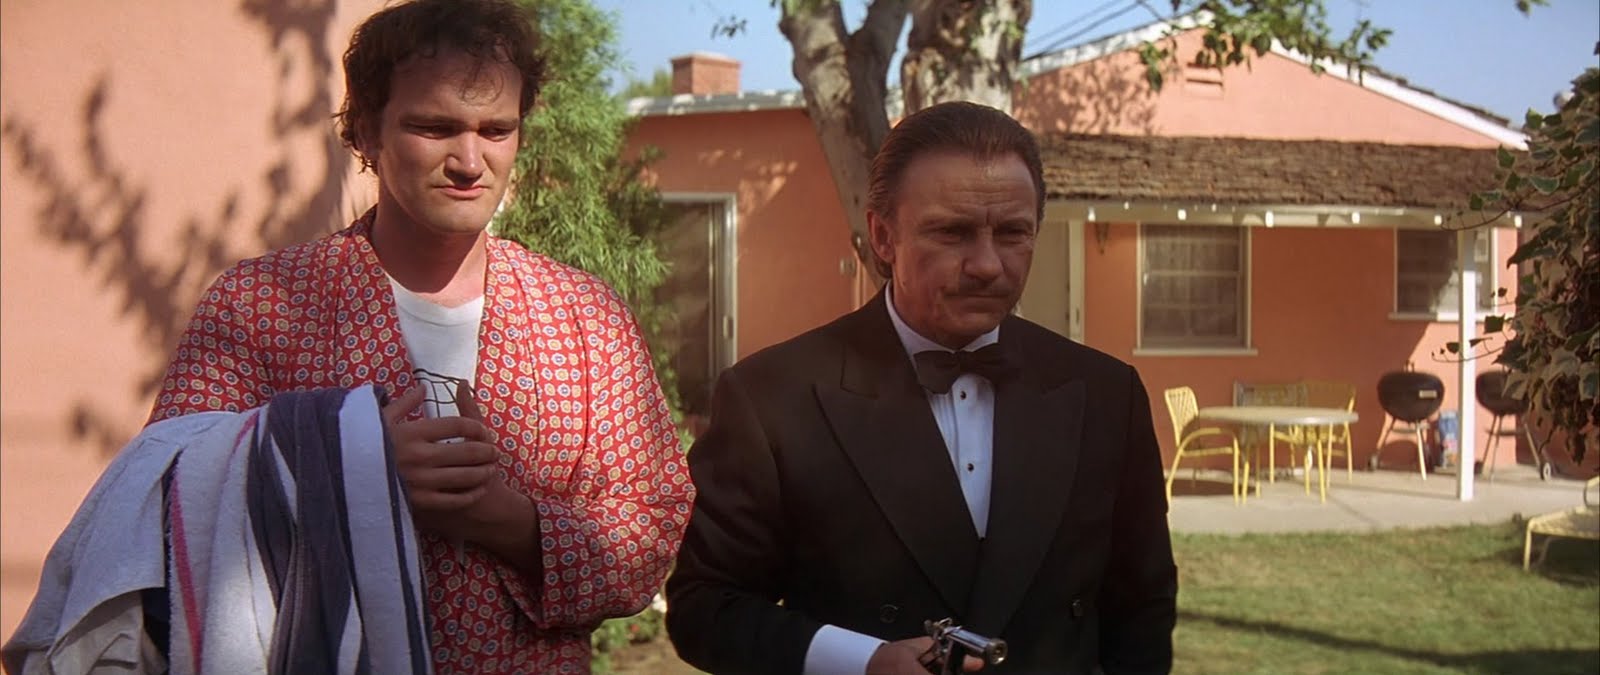 pulp-fiction-filming-locations-jimmie-house-pic6